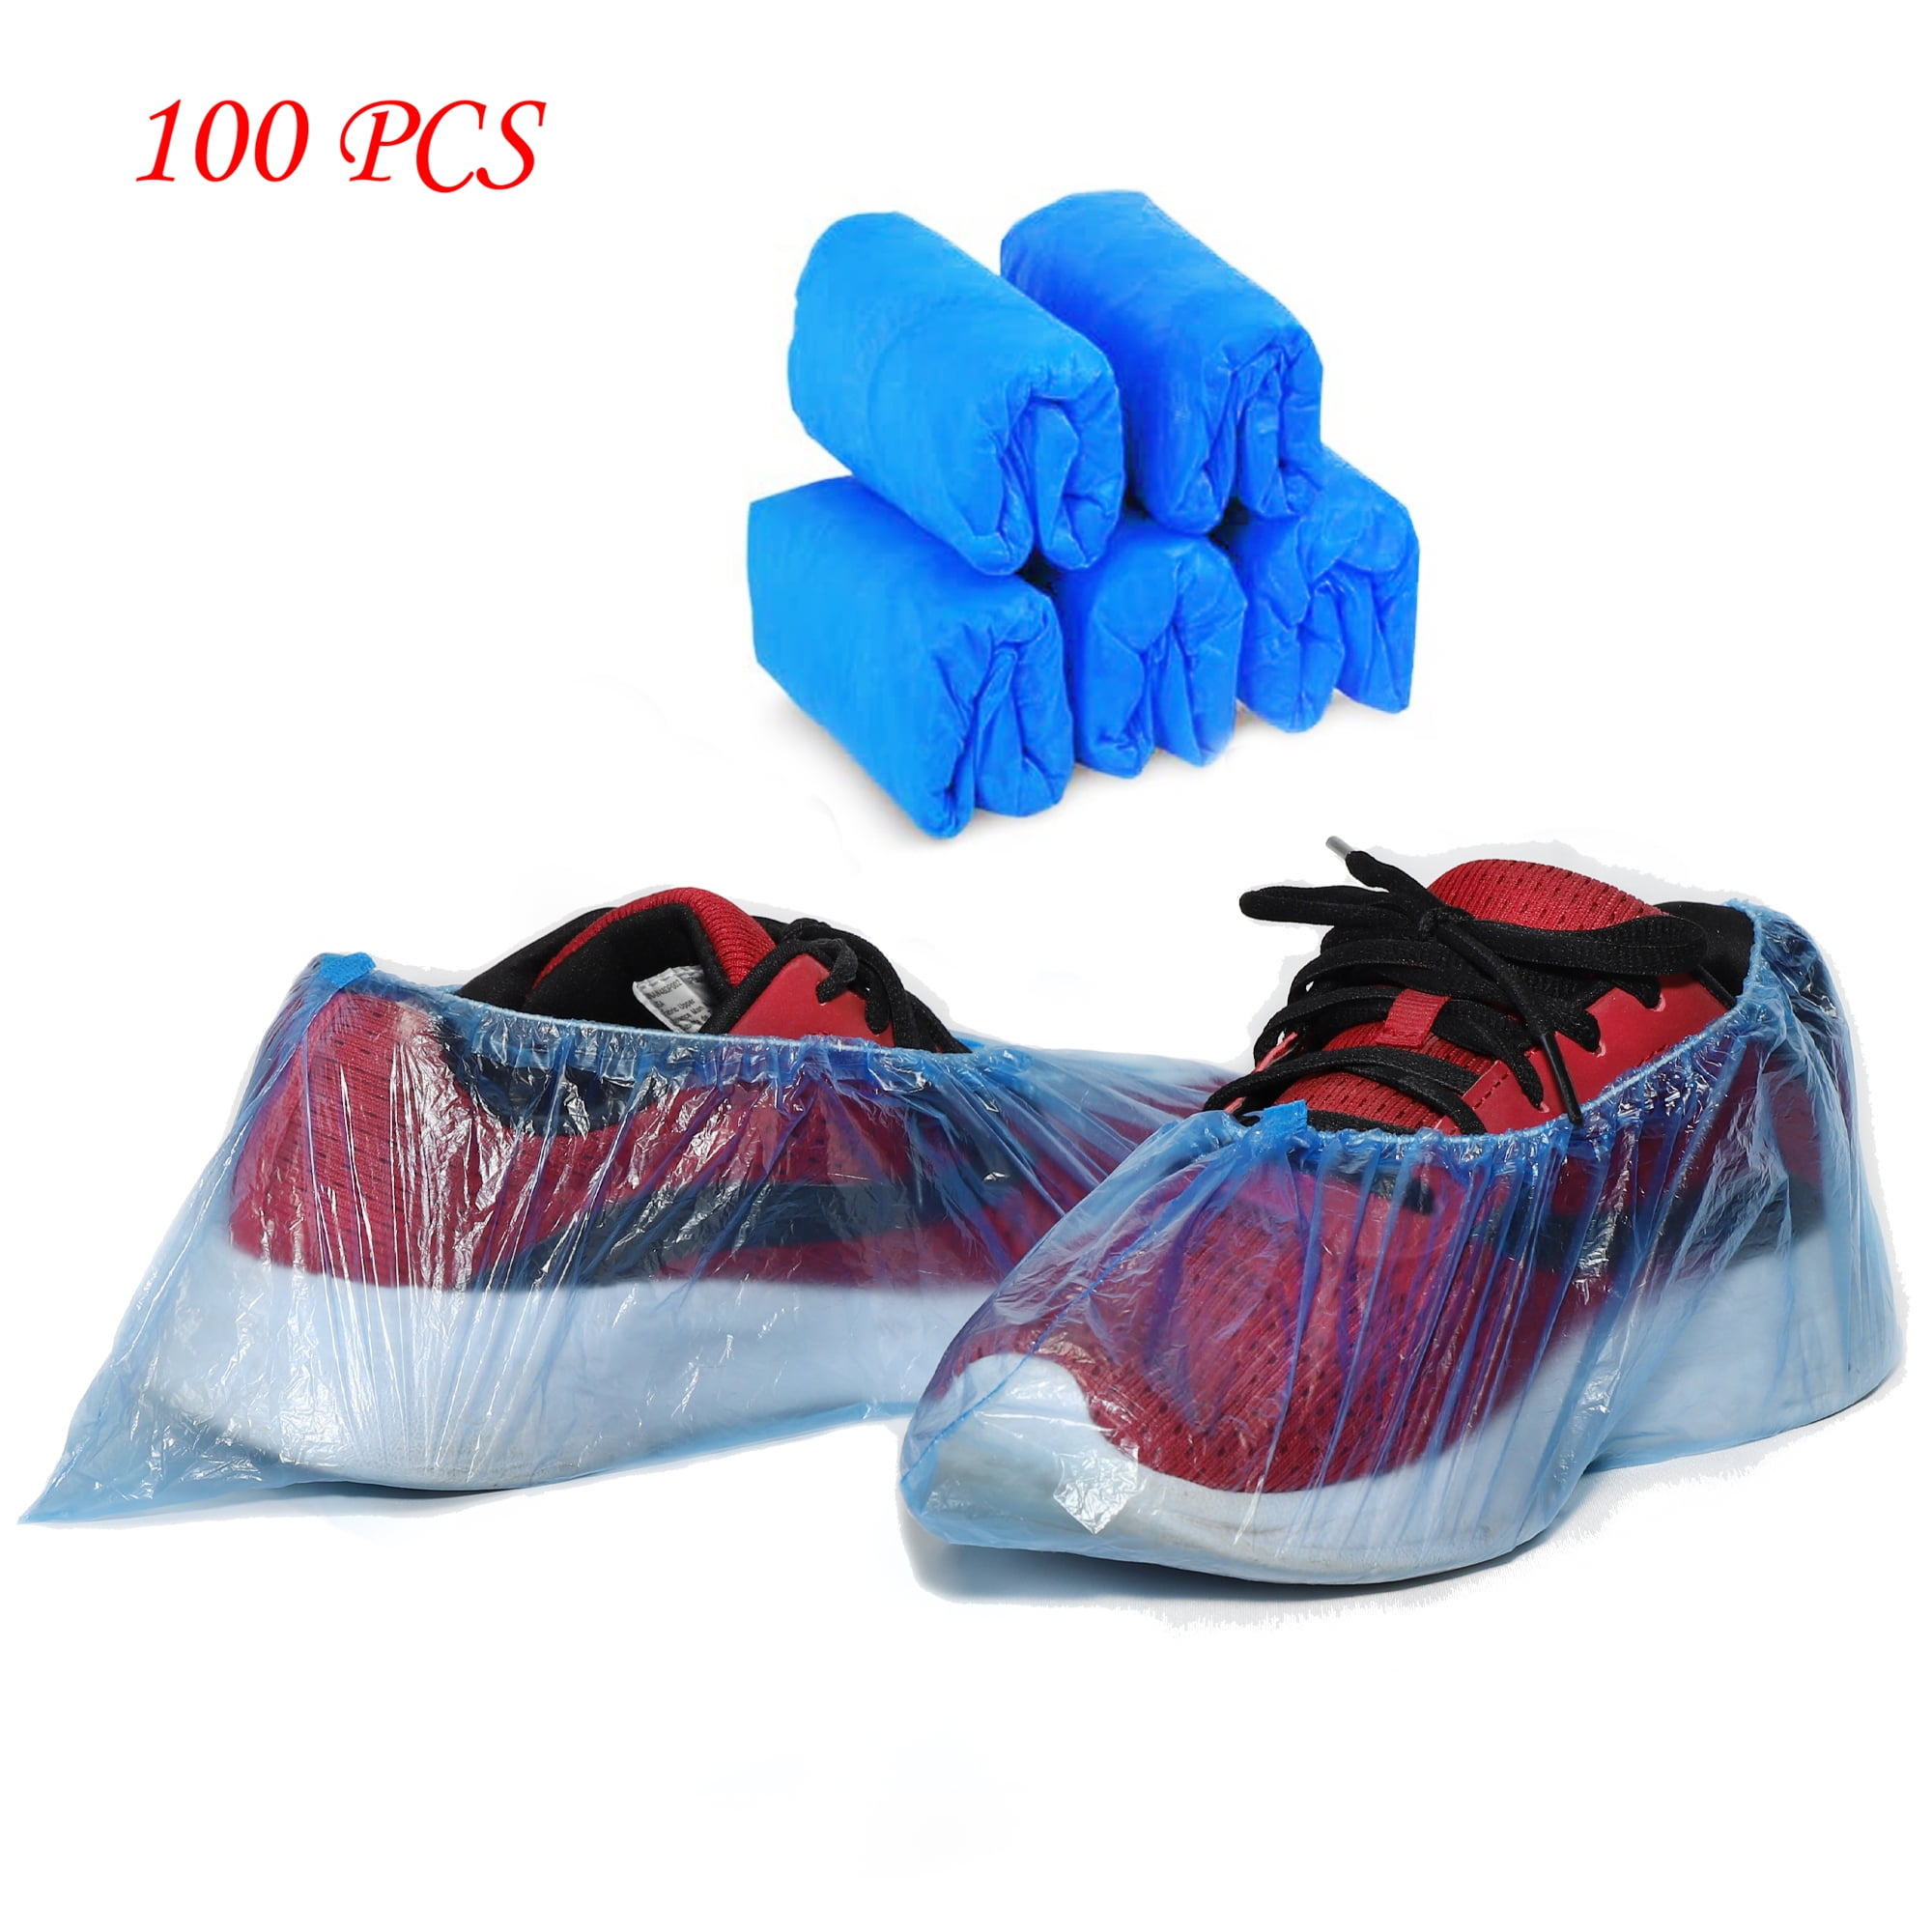 10/50/100 pcs Disposable Shoe Covers Overshoes For Shoes Protect Carpets & Flool 